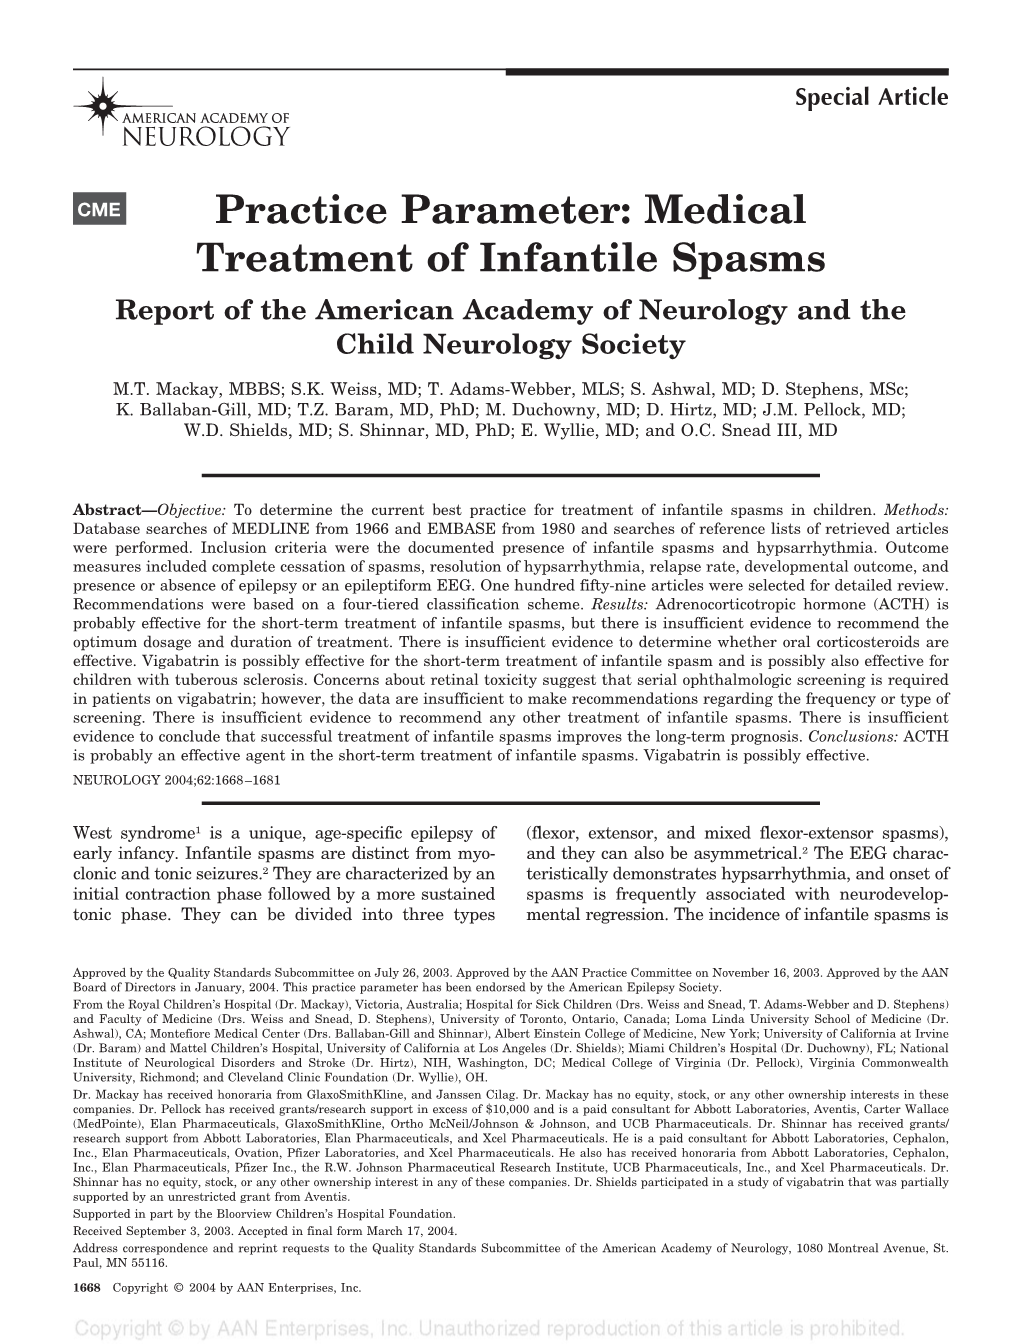 Practice Parameter: Medical Treatment of Infantile Spasms Report of the American Academy of Neurology and the Child Neurology Society